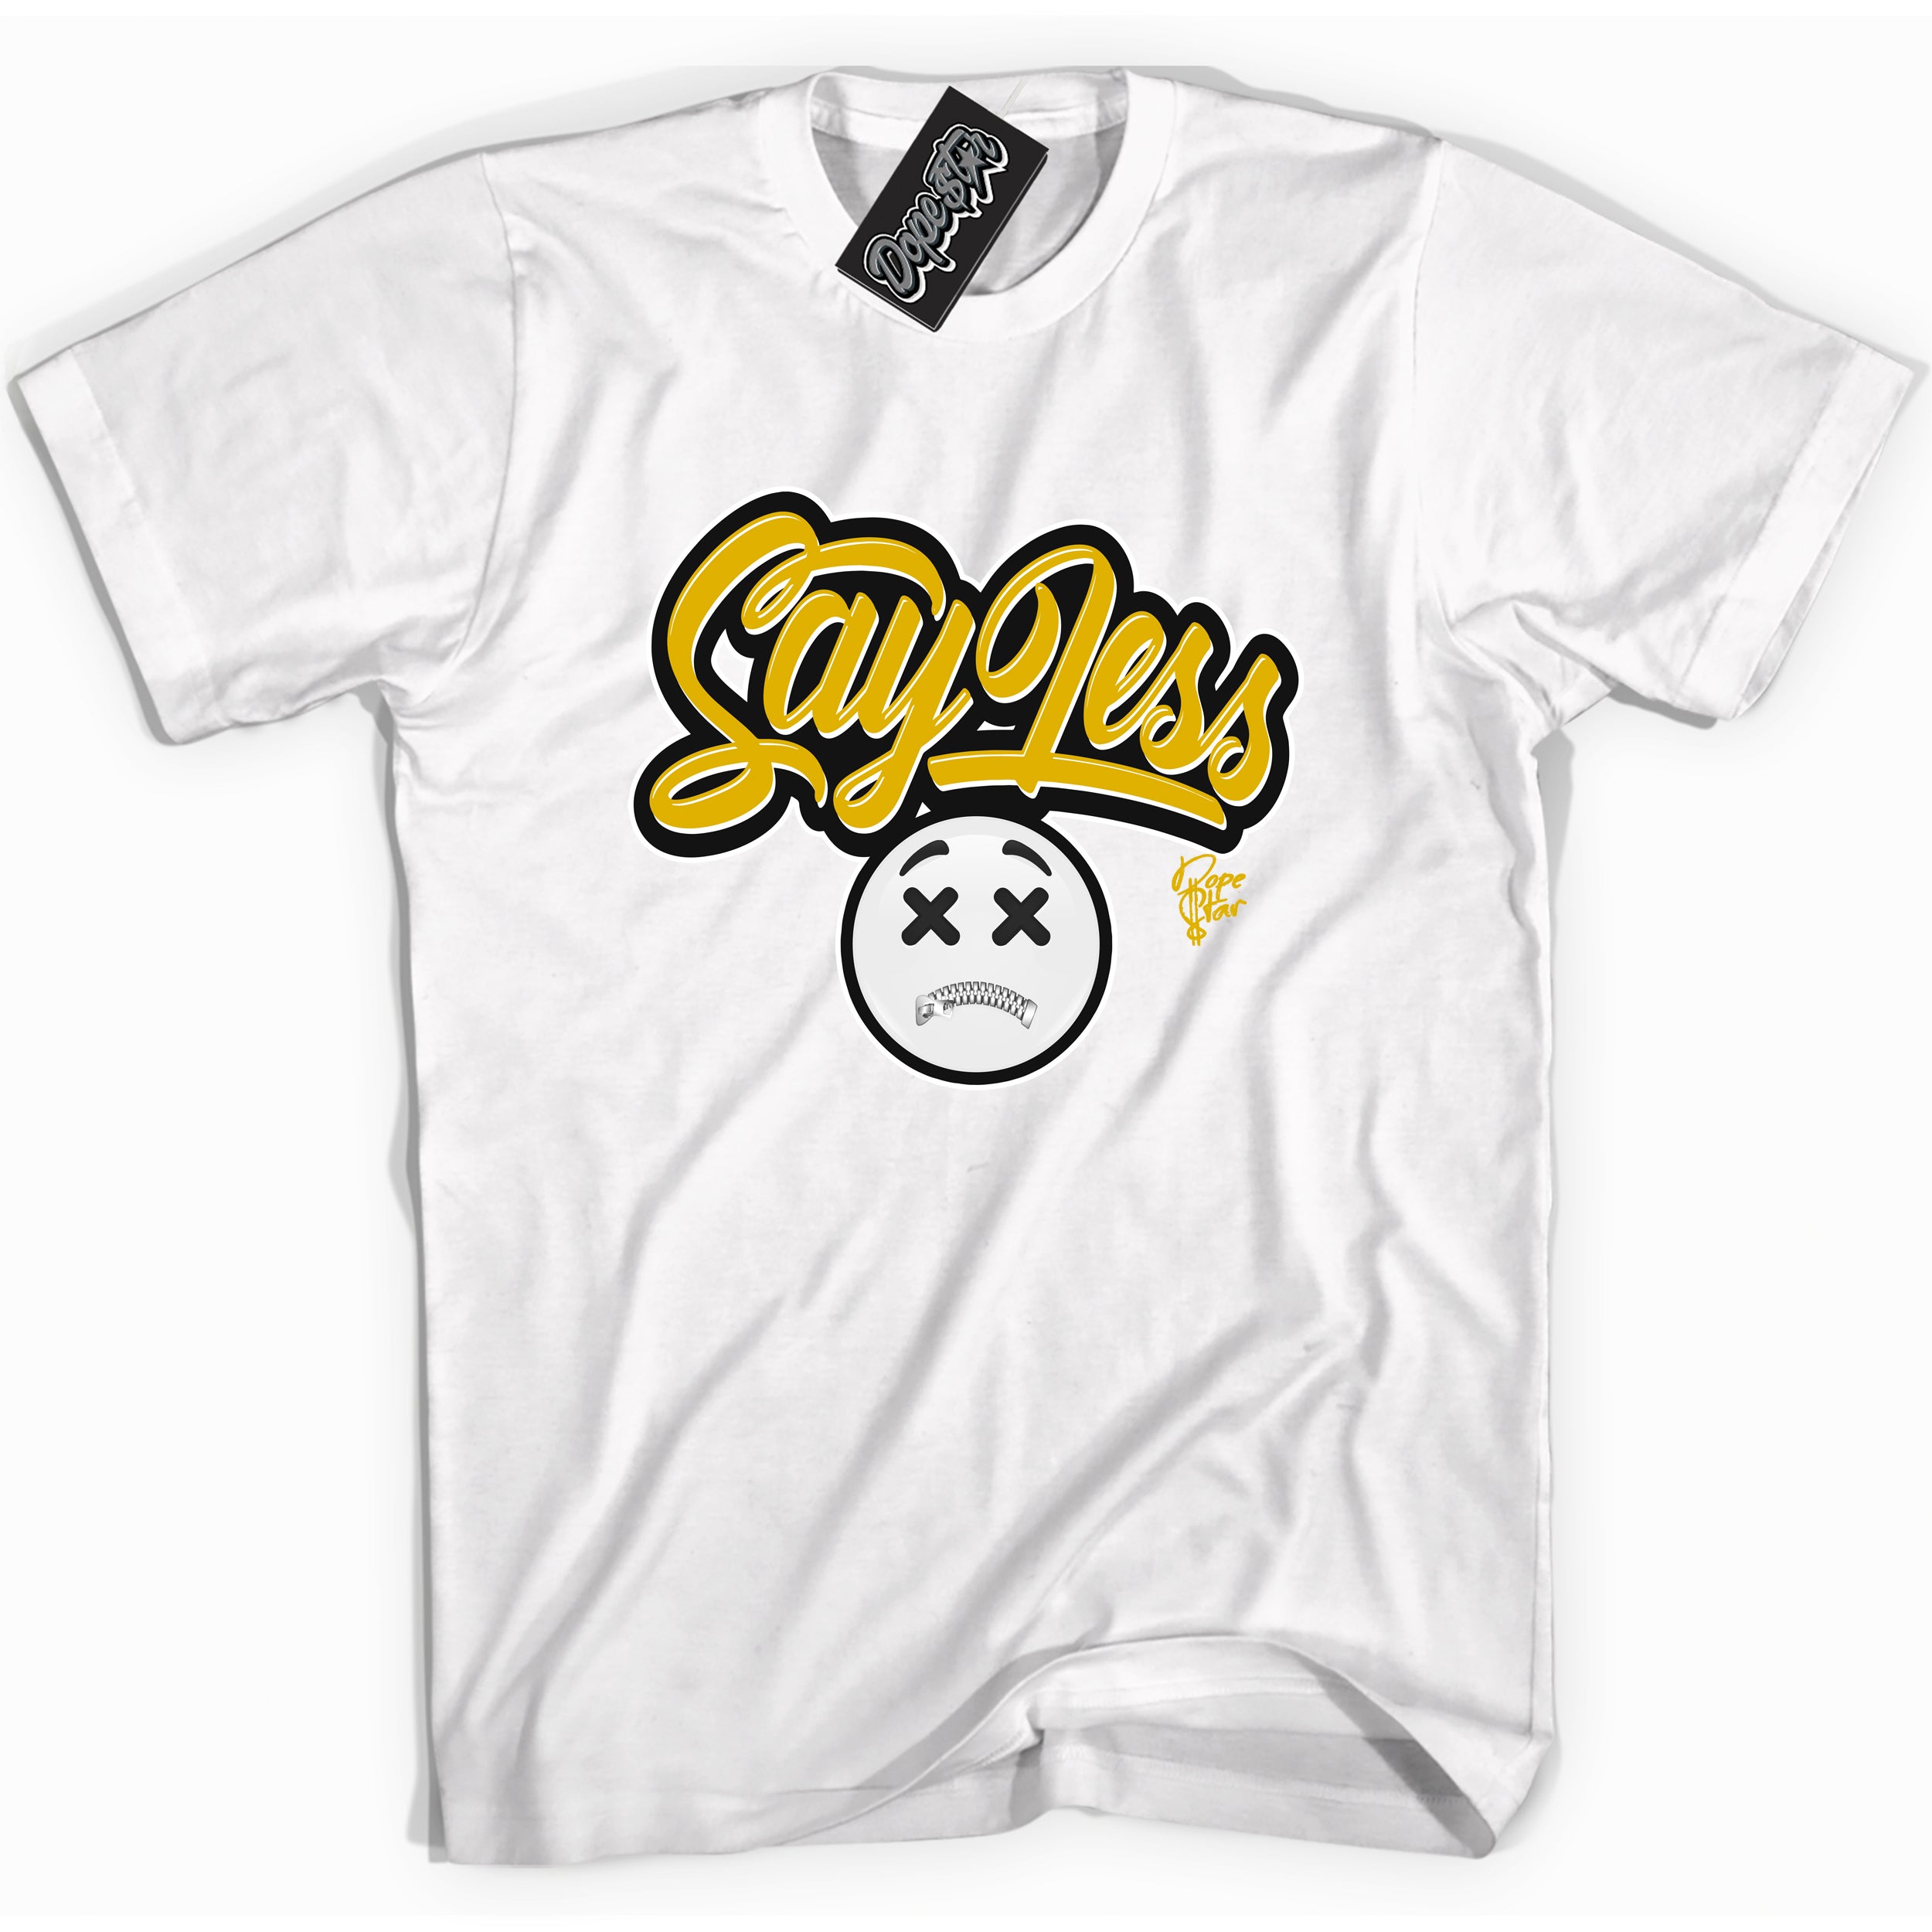 Cool white Shirt with “ Say Less ” design that perfectly matches Yellow Ochre 6s Sneakers.